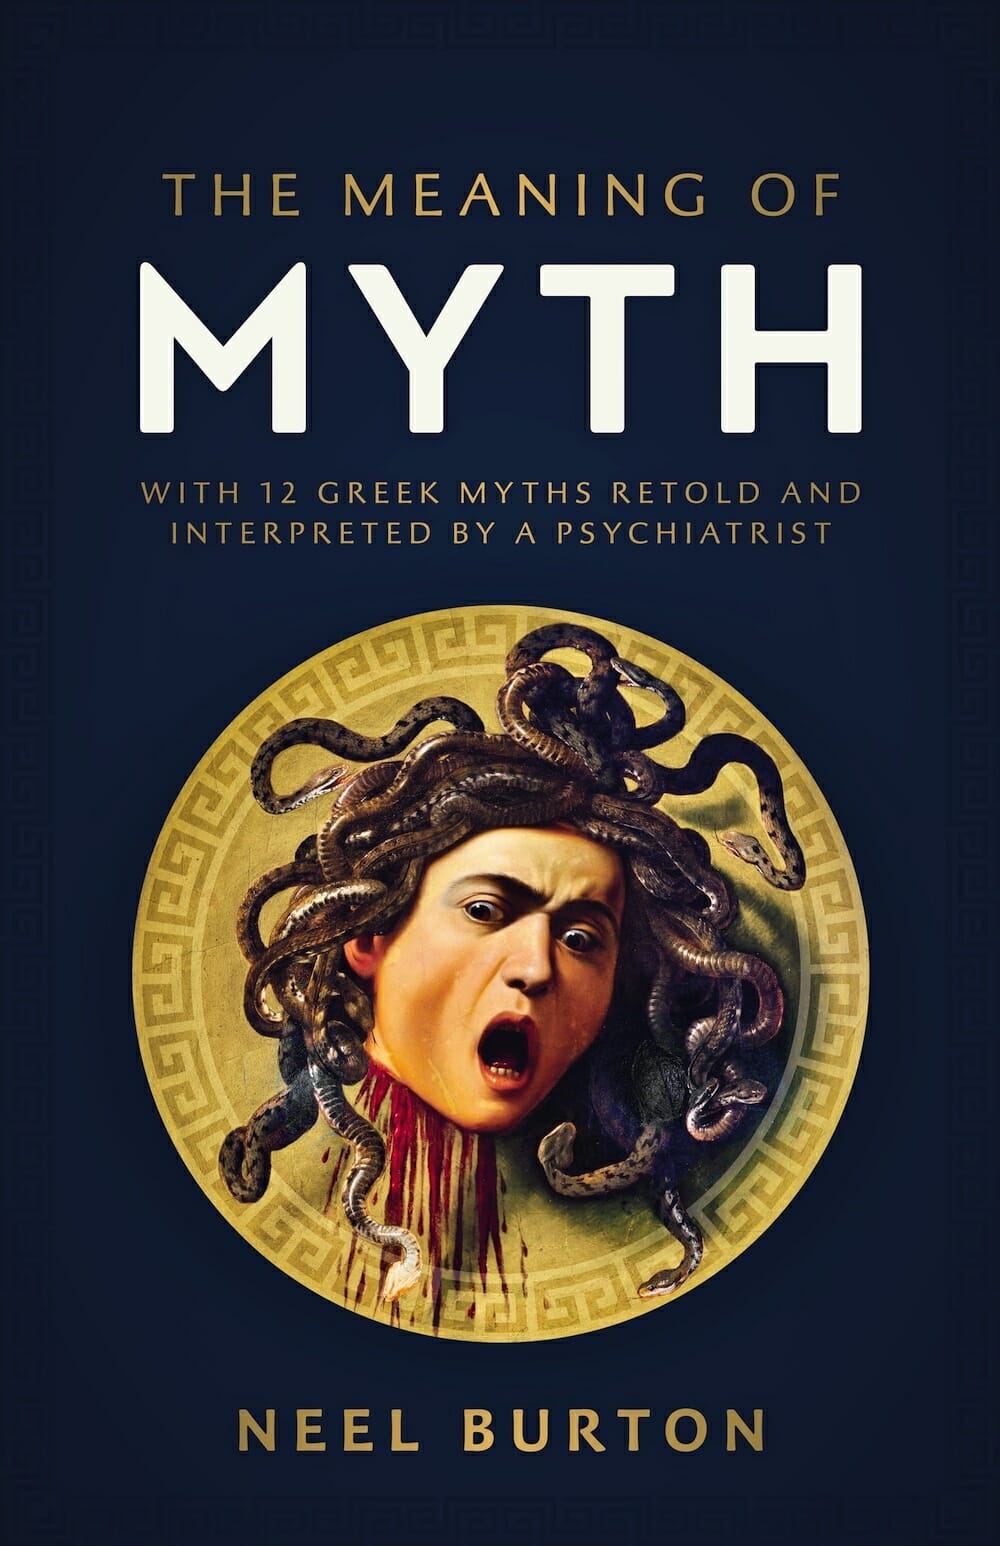 MEANING OF MYTH